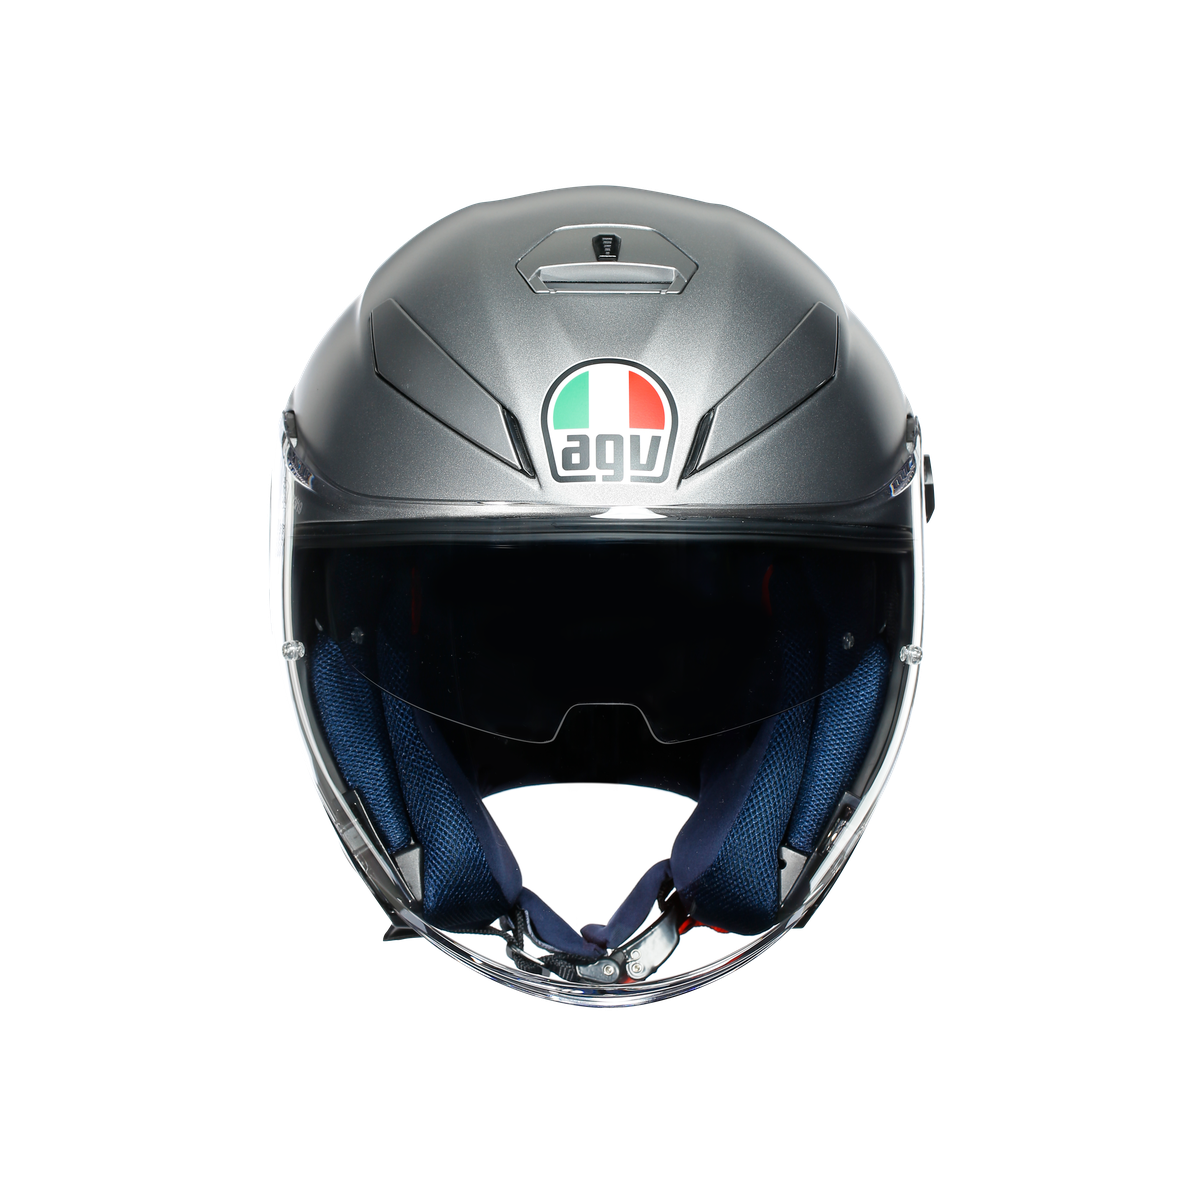 Touring motorcycle helmet: K-5 Jet Agv E2205 Solid - - AGV helmets - Dainese (Official Shop)